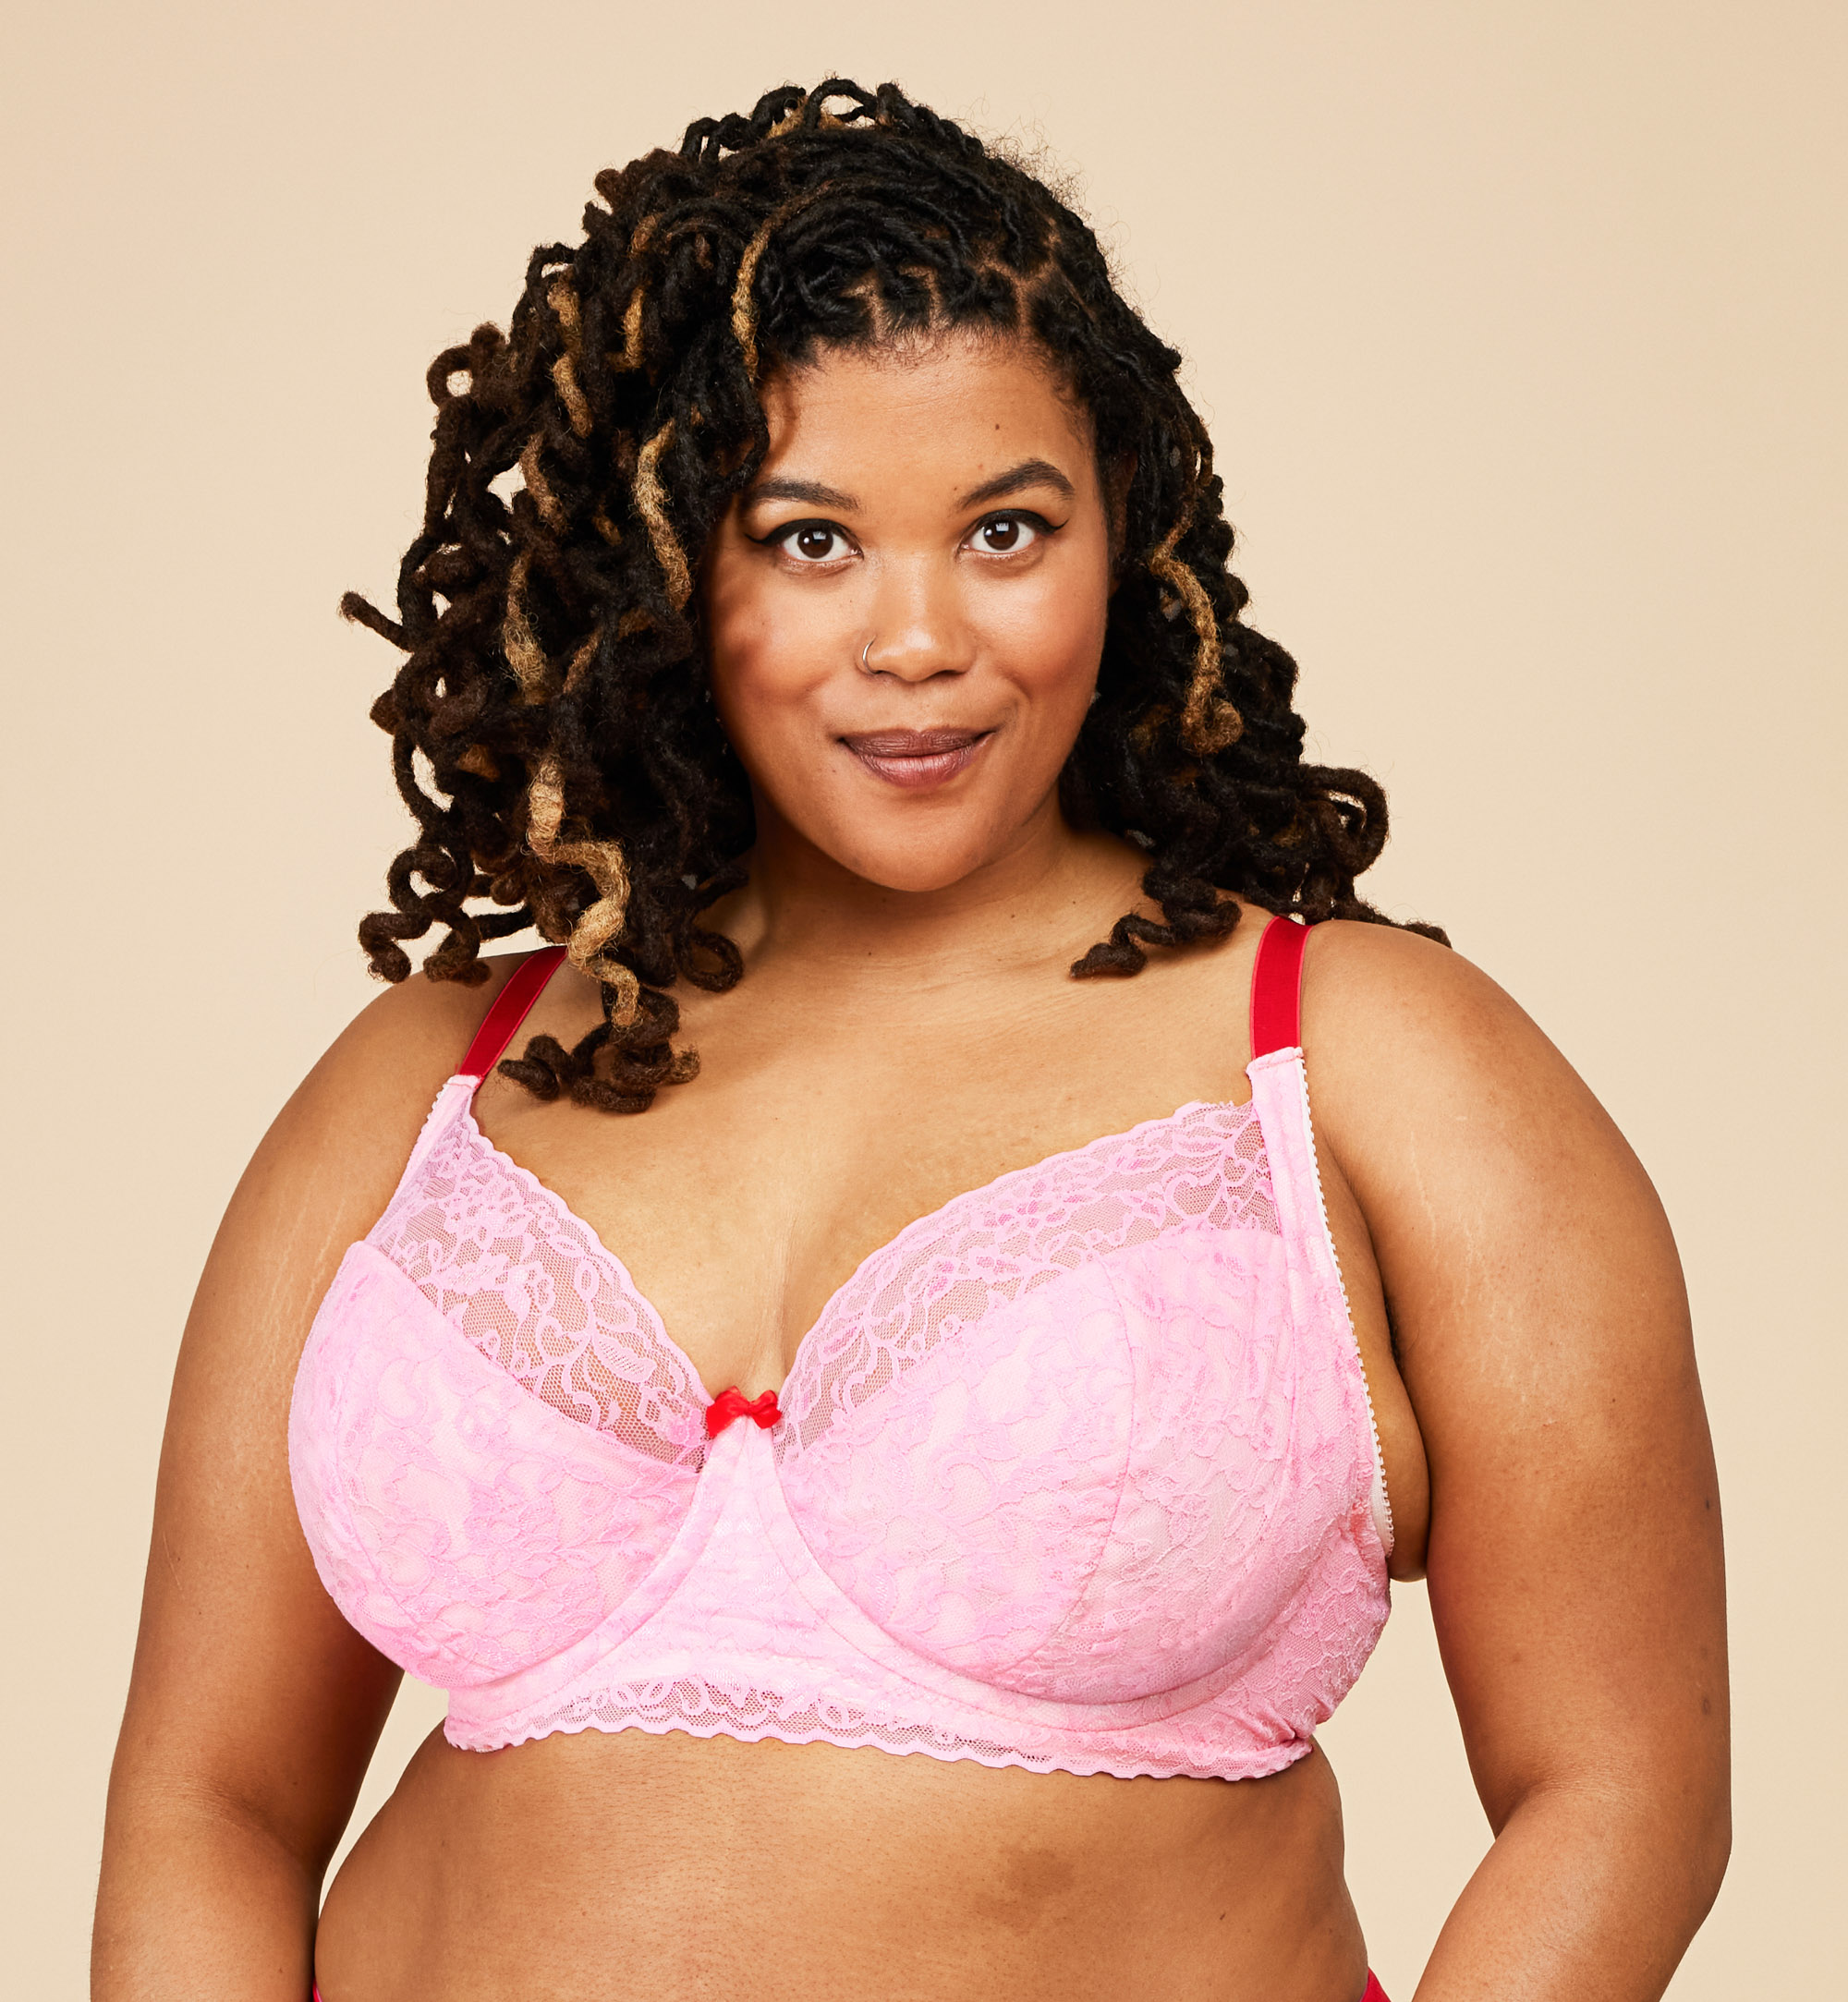 How often should you replace your bra? – Seamless Lingerie